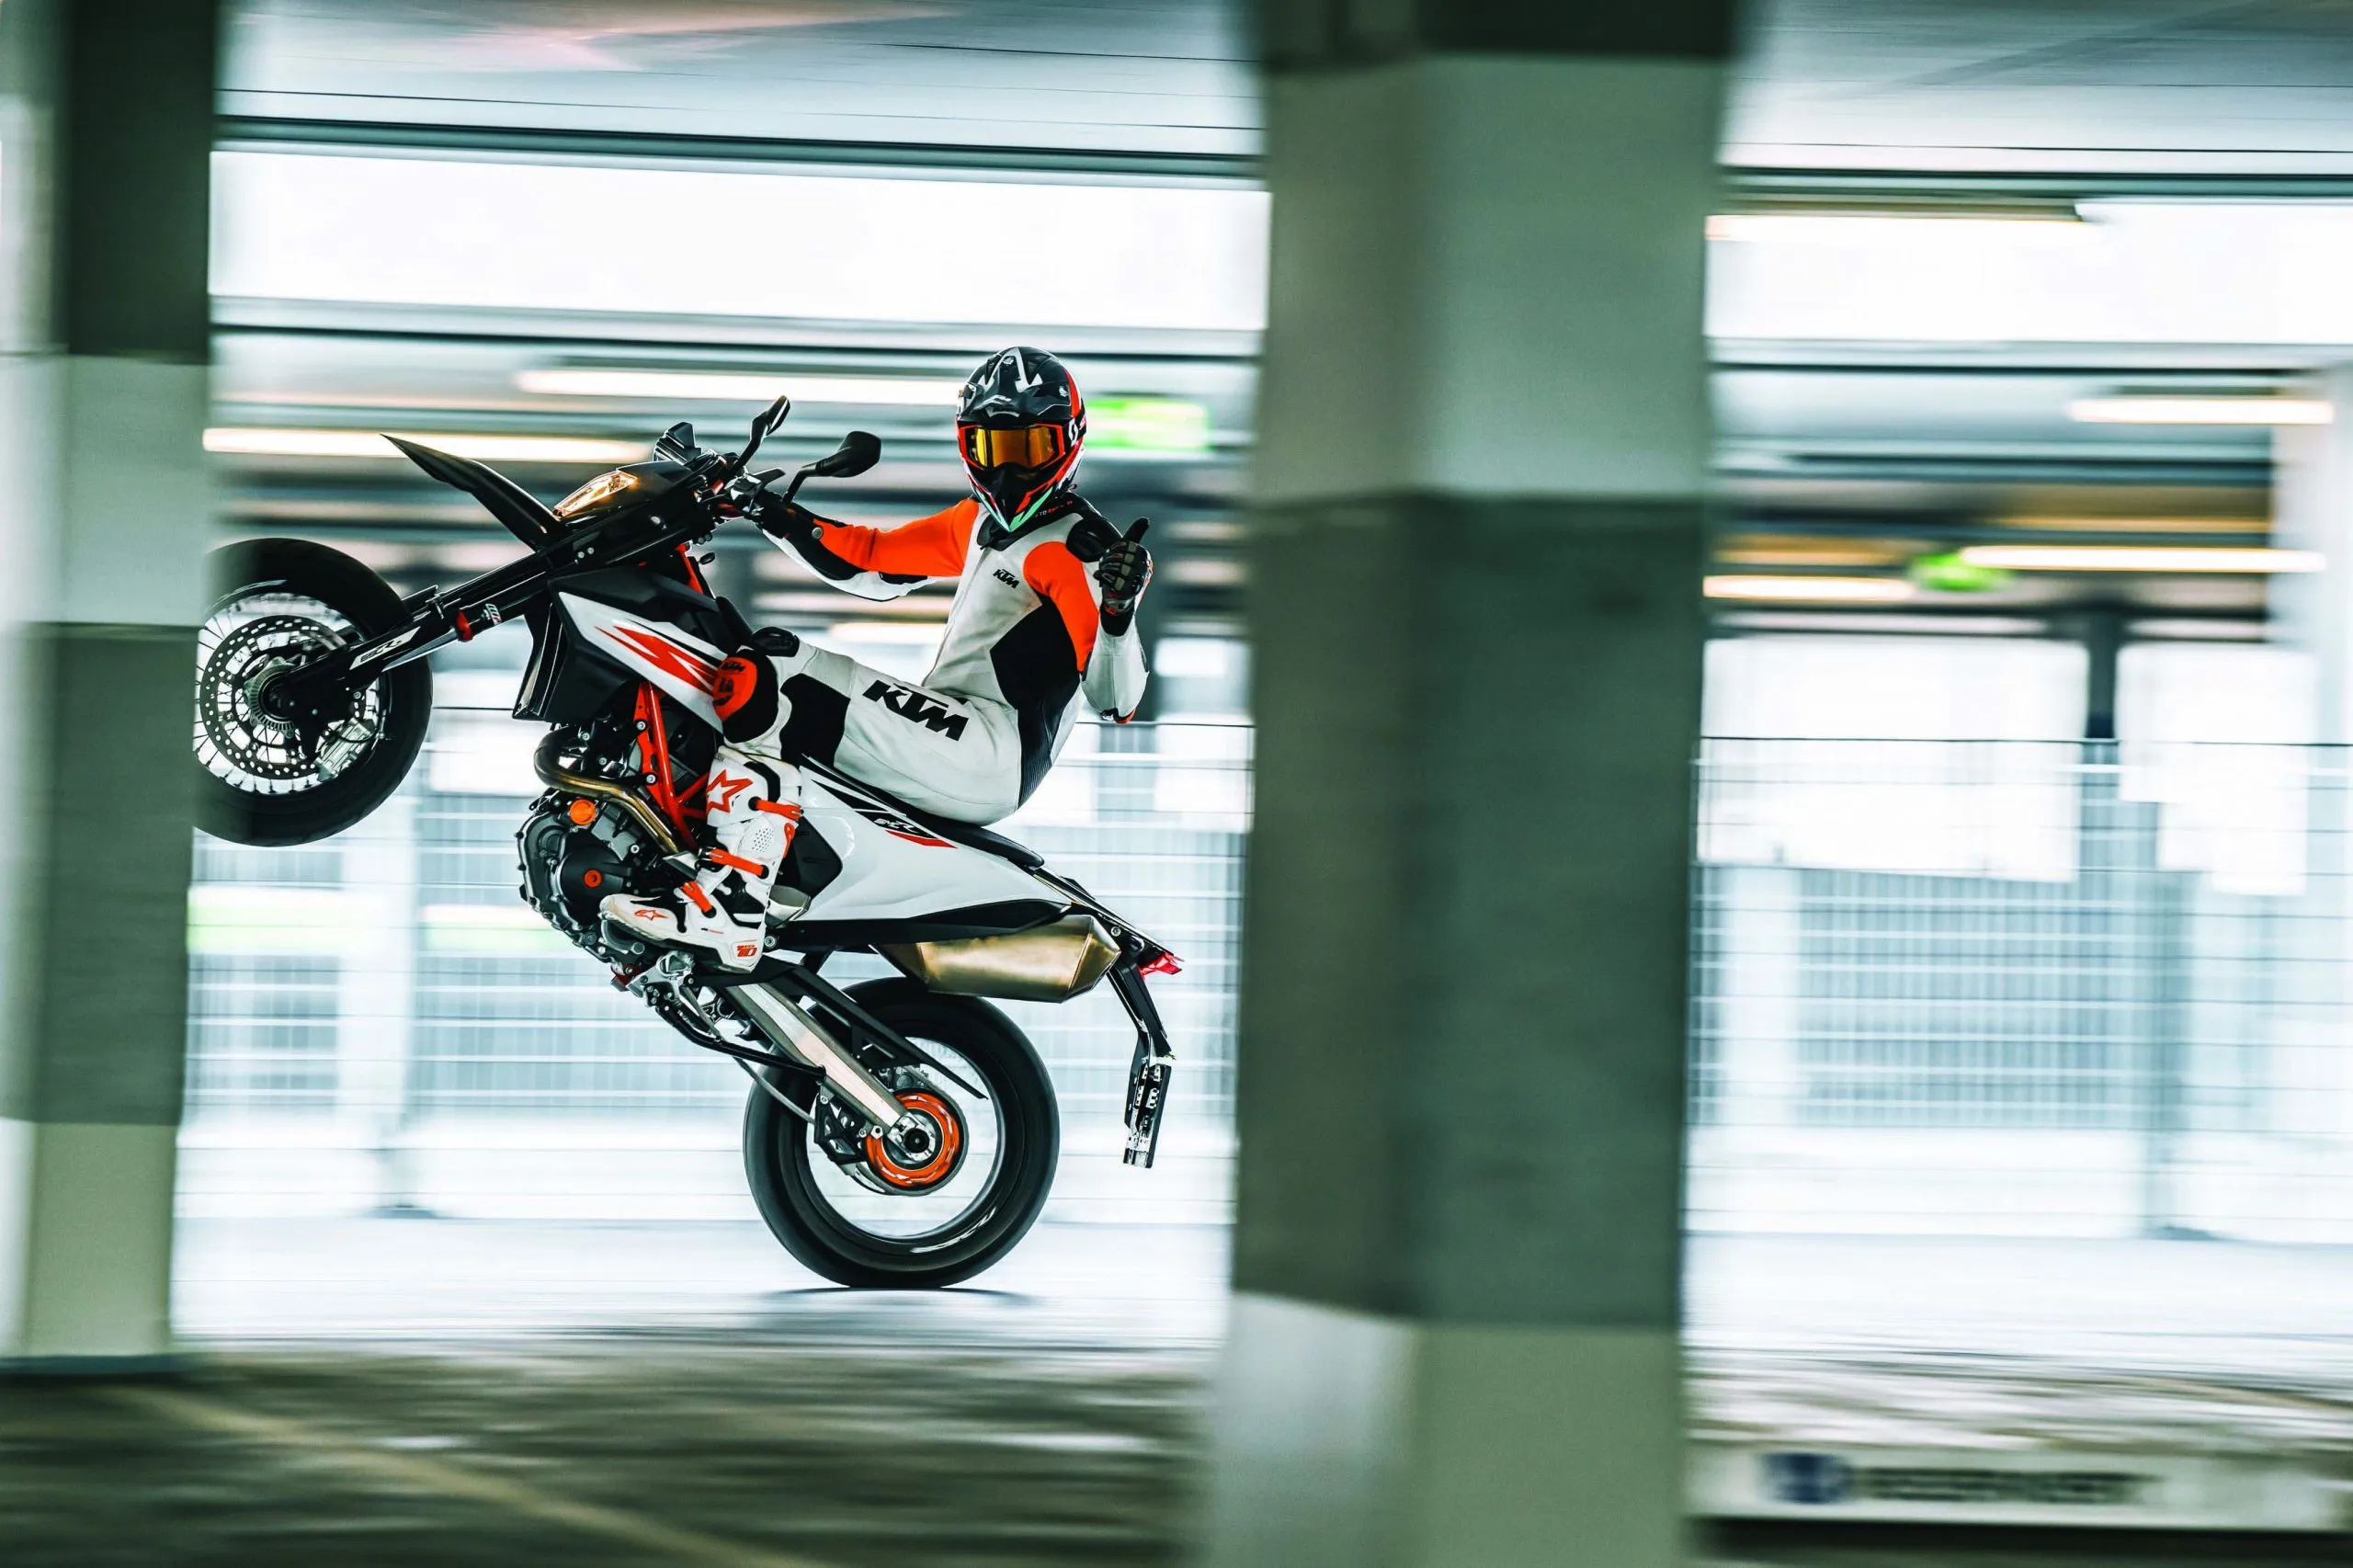 Supermoto: The KTM 690 SMC R, An enduro bike with 74bhp, The latest fully-adjustable WP APEX suspension. 2560x1710 HD Background.